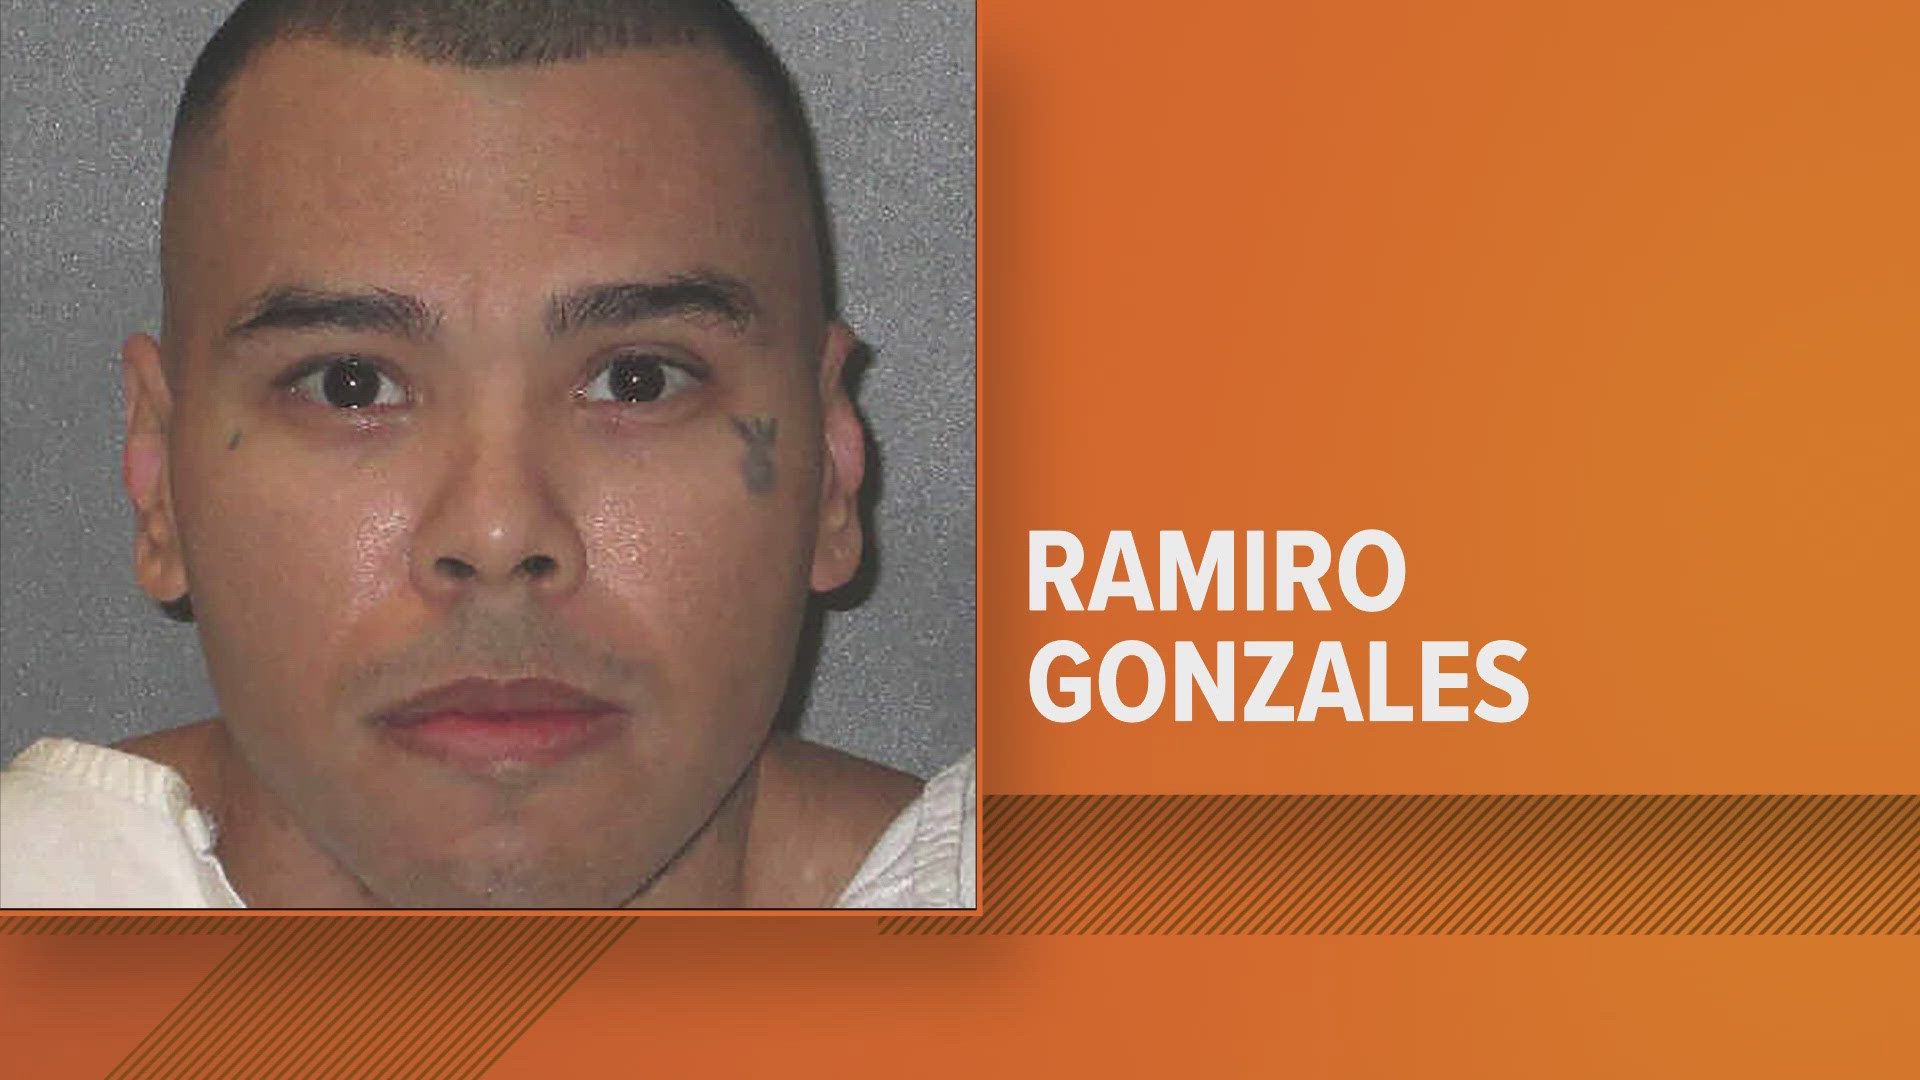 Ramiro Gonzales was executed by legal injection for the murder of an 18-year-old approximately 23 years ago.